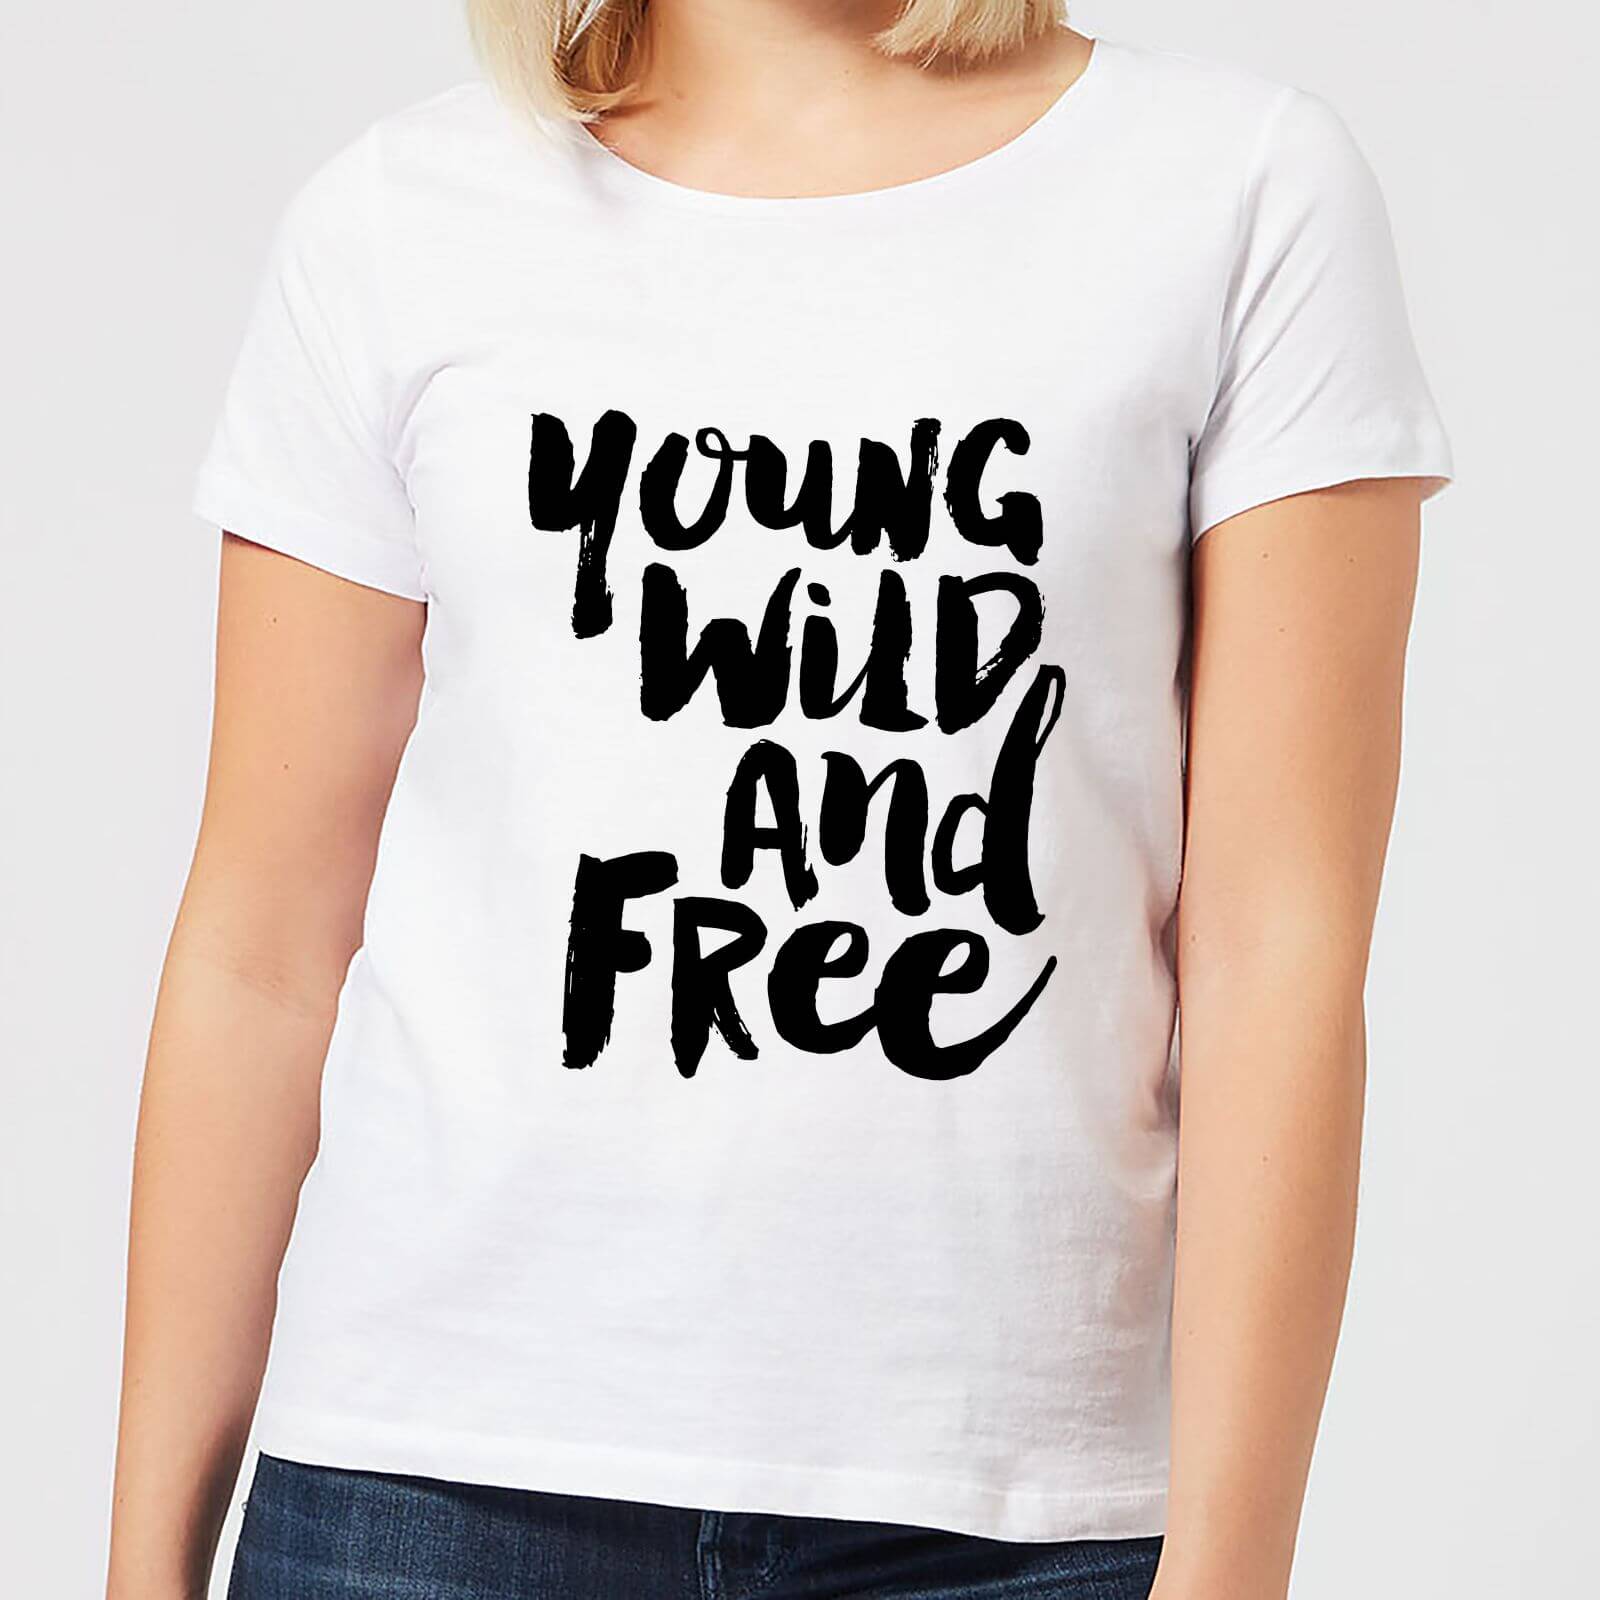 The Motivated Type Young, Wild And Free. Women's T-Shirt - White - S - White